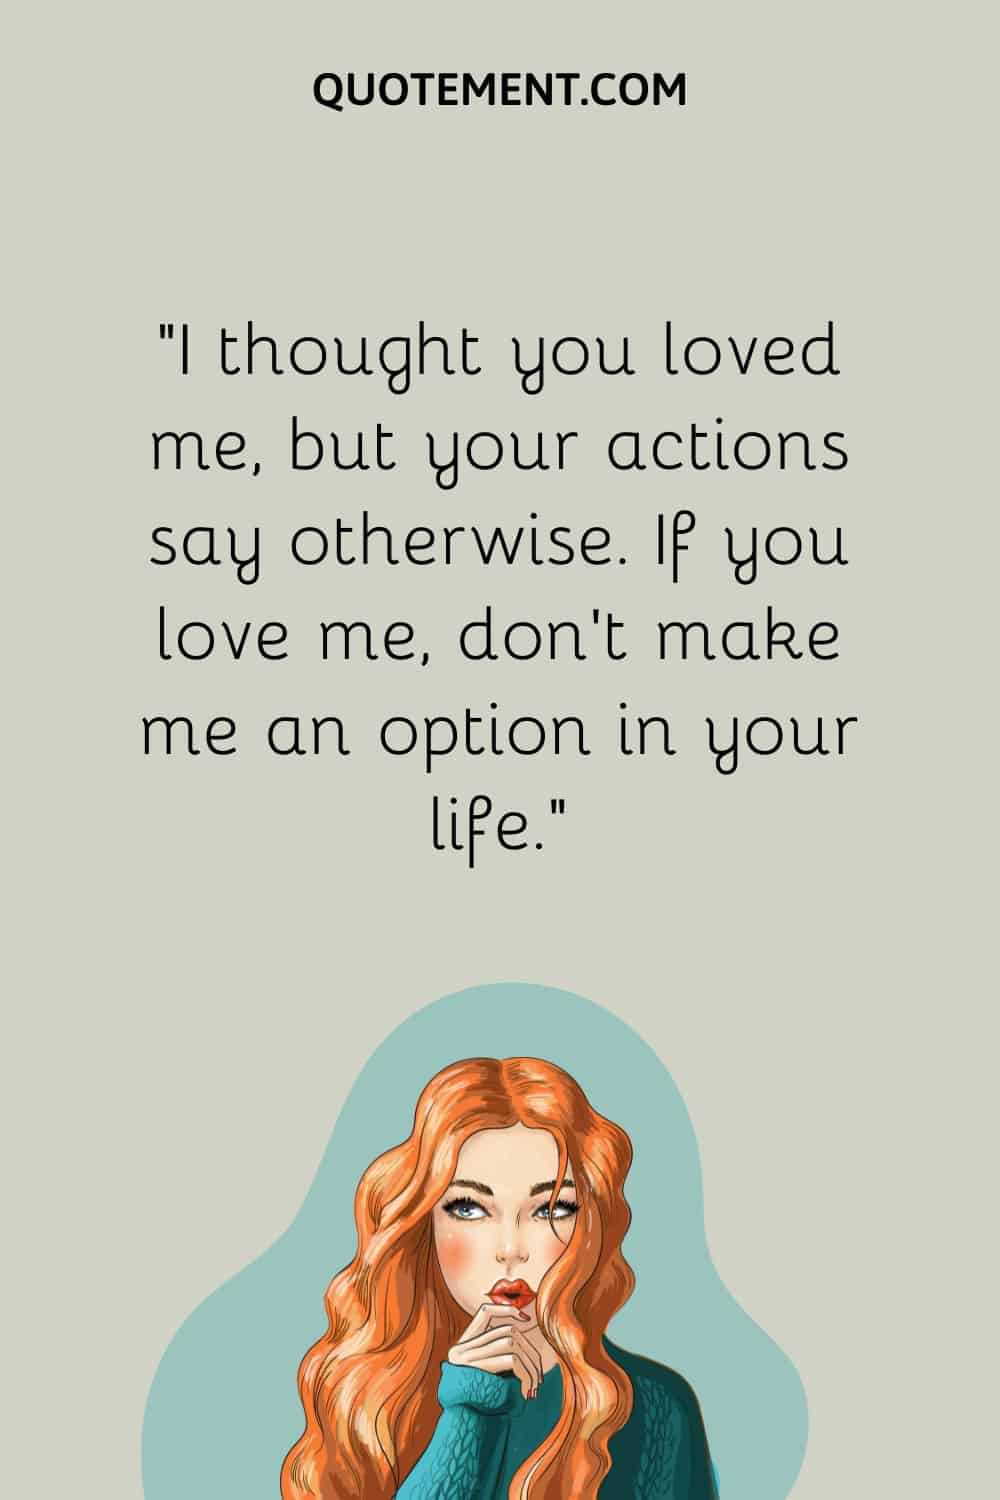 I thought you loved me, but your actions say otherwise. If you love me, don’t make me an option in your life.